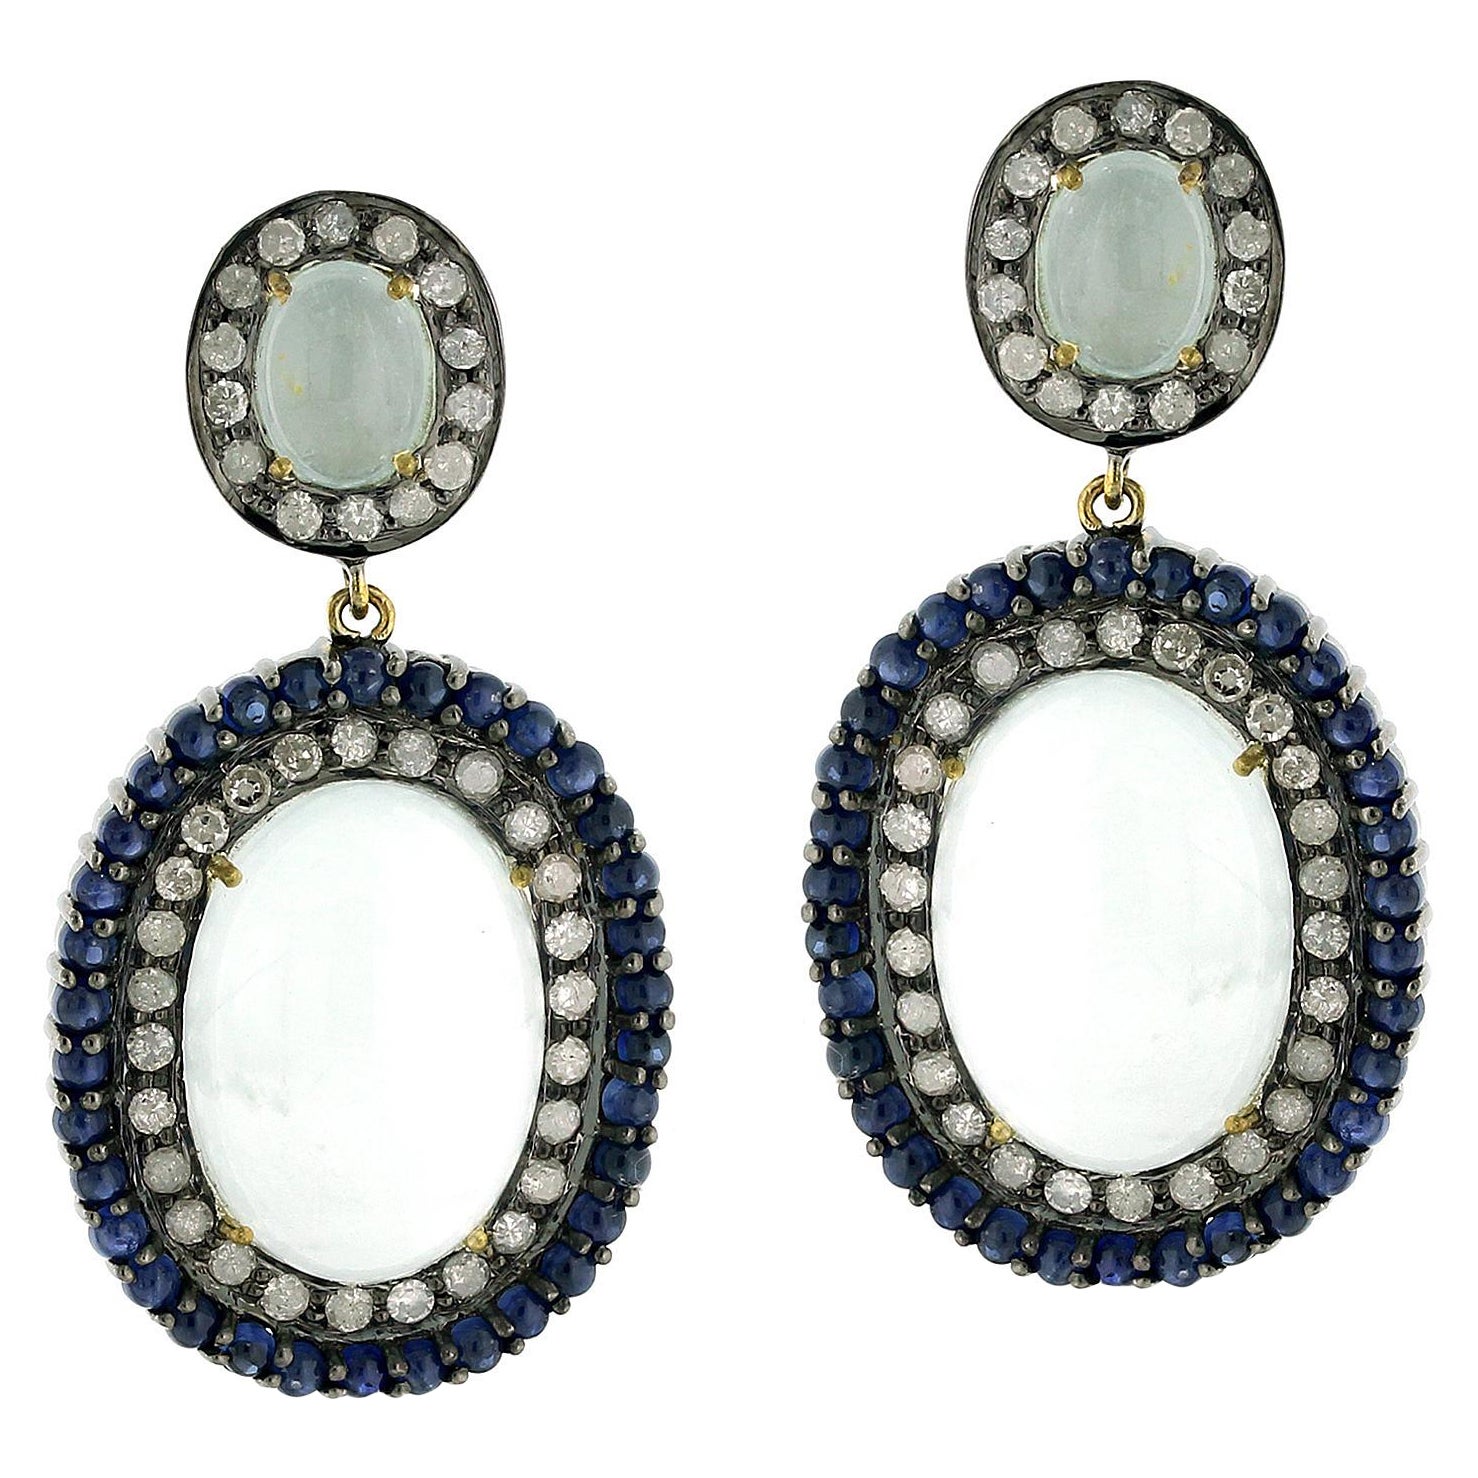 Oval Shaped Agate Earring Surrounded by Blue Sapphire & Diamonds in Pave Setting